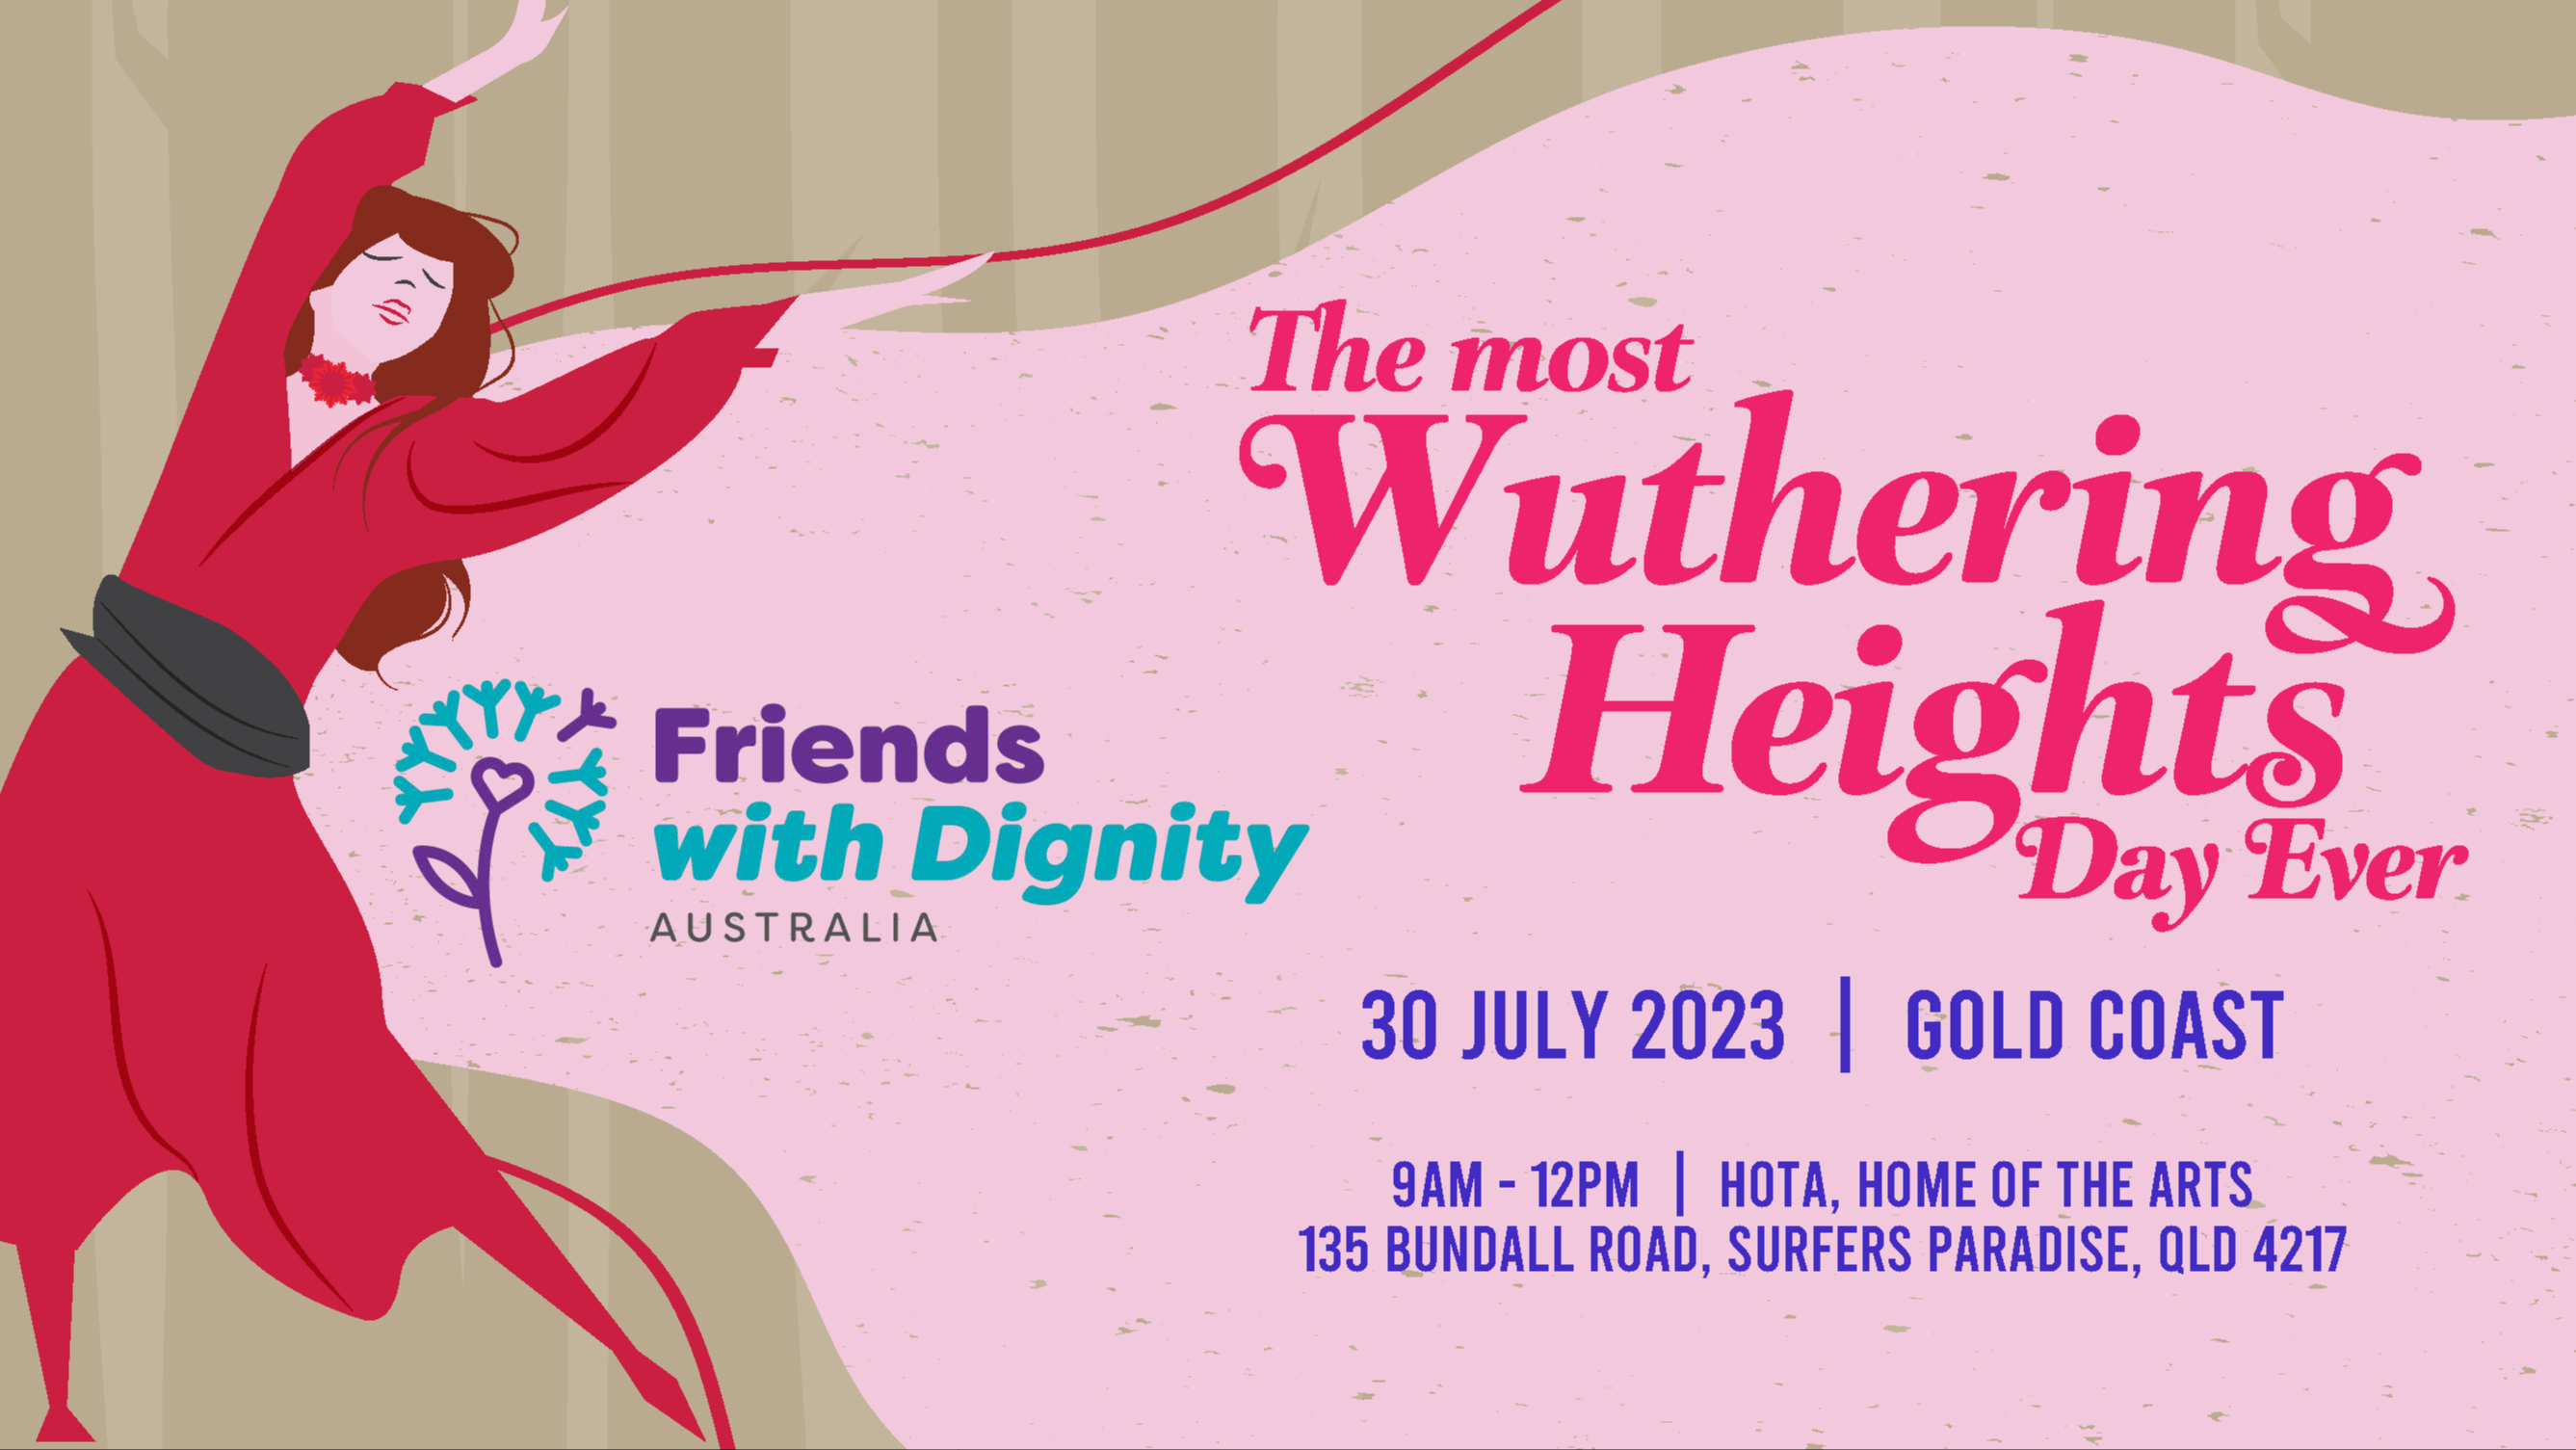 The Most Wuthering Heights Day Ever 2023